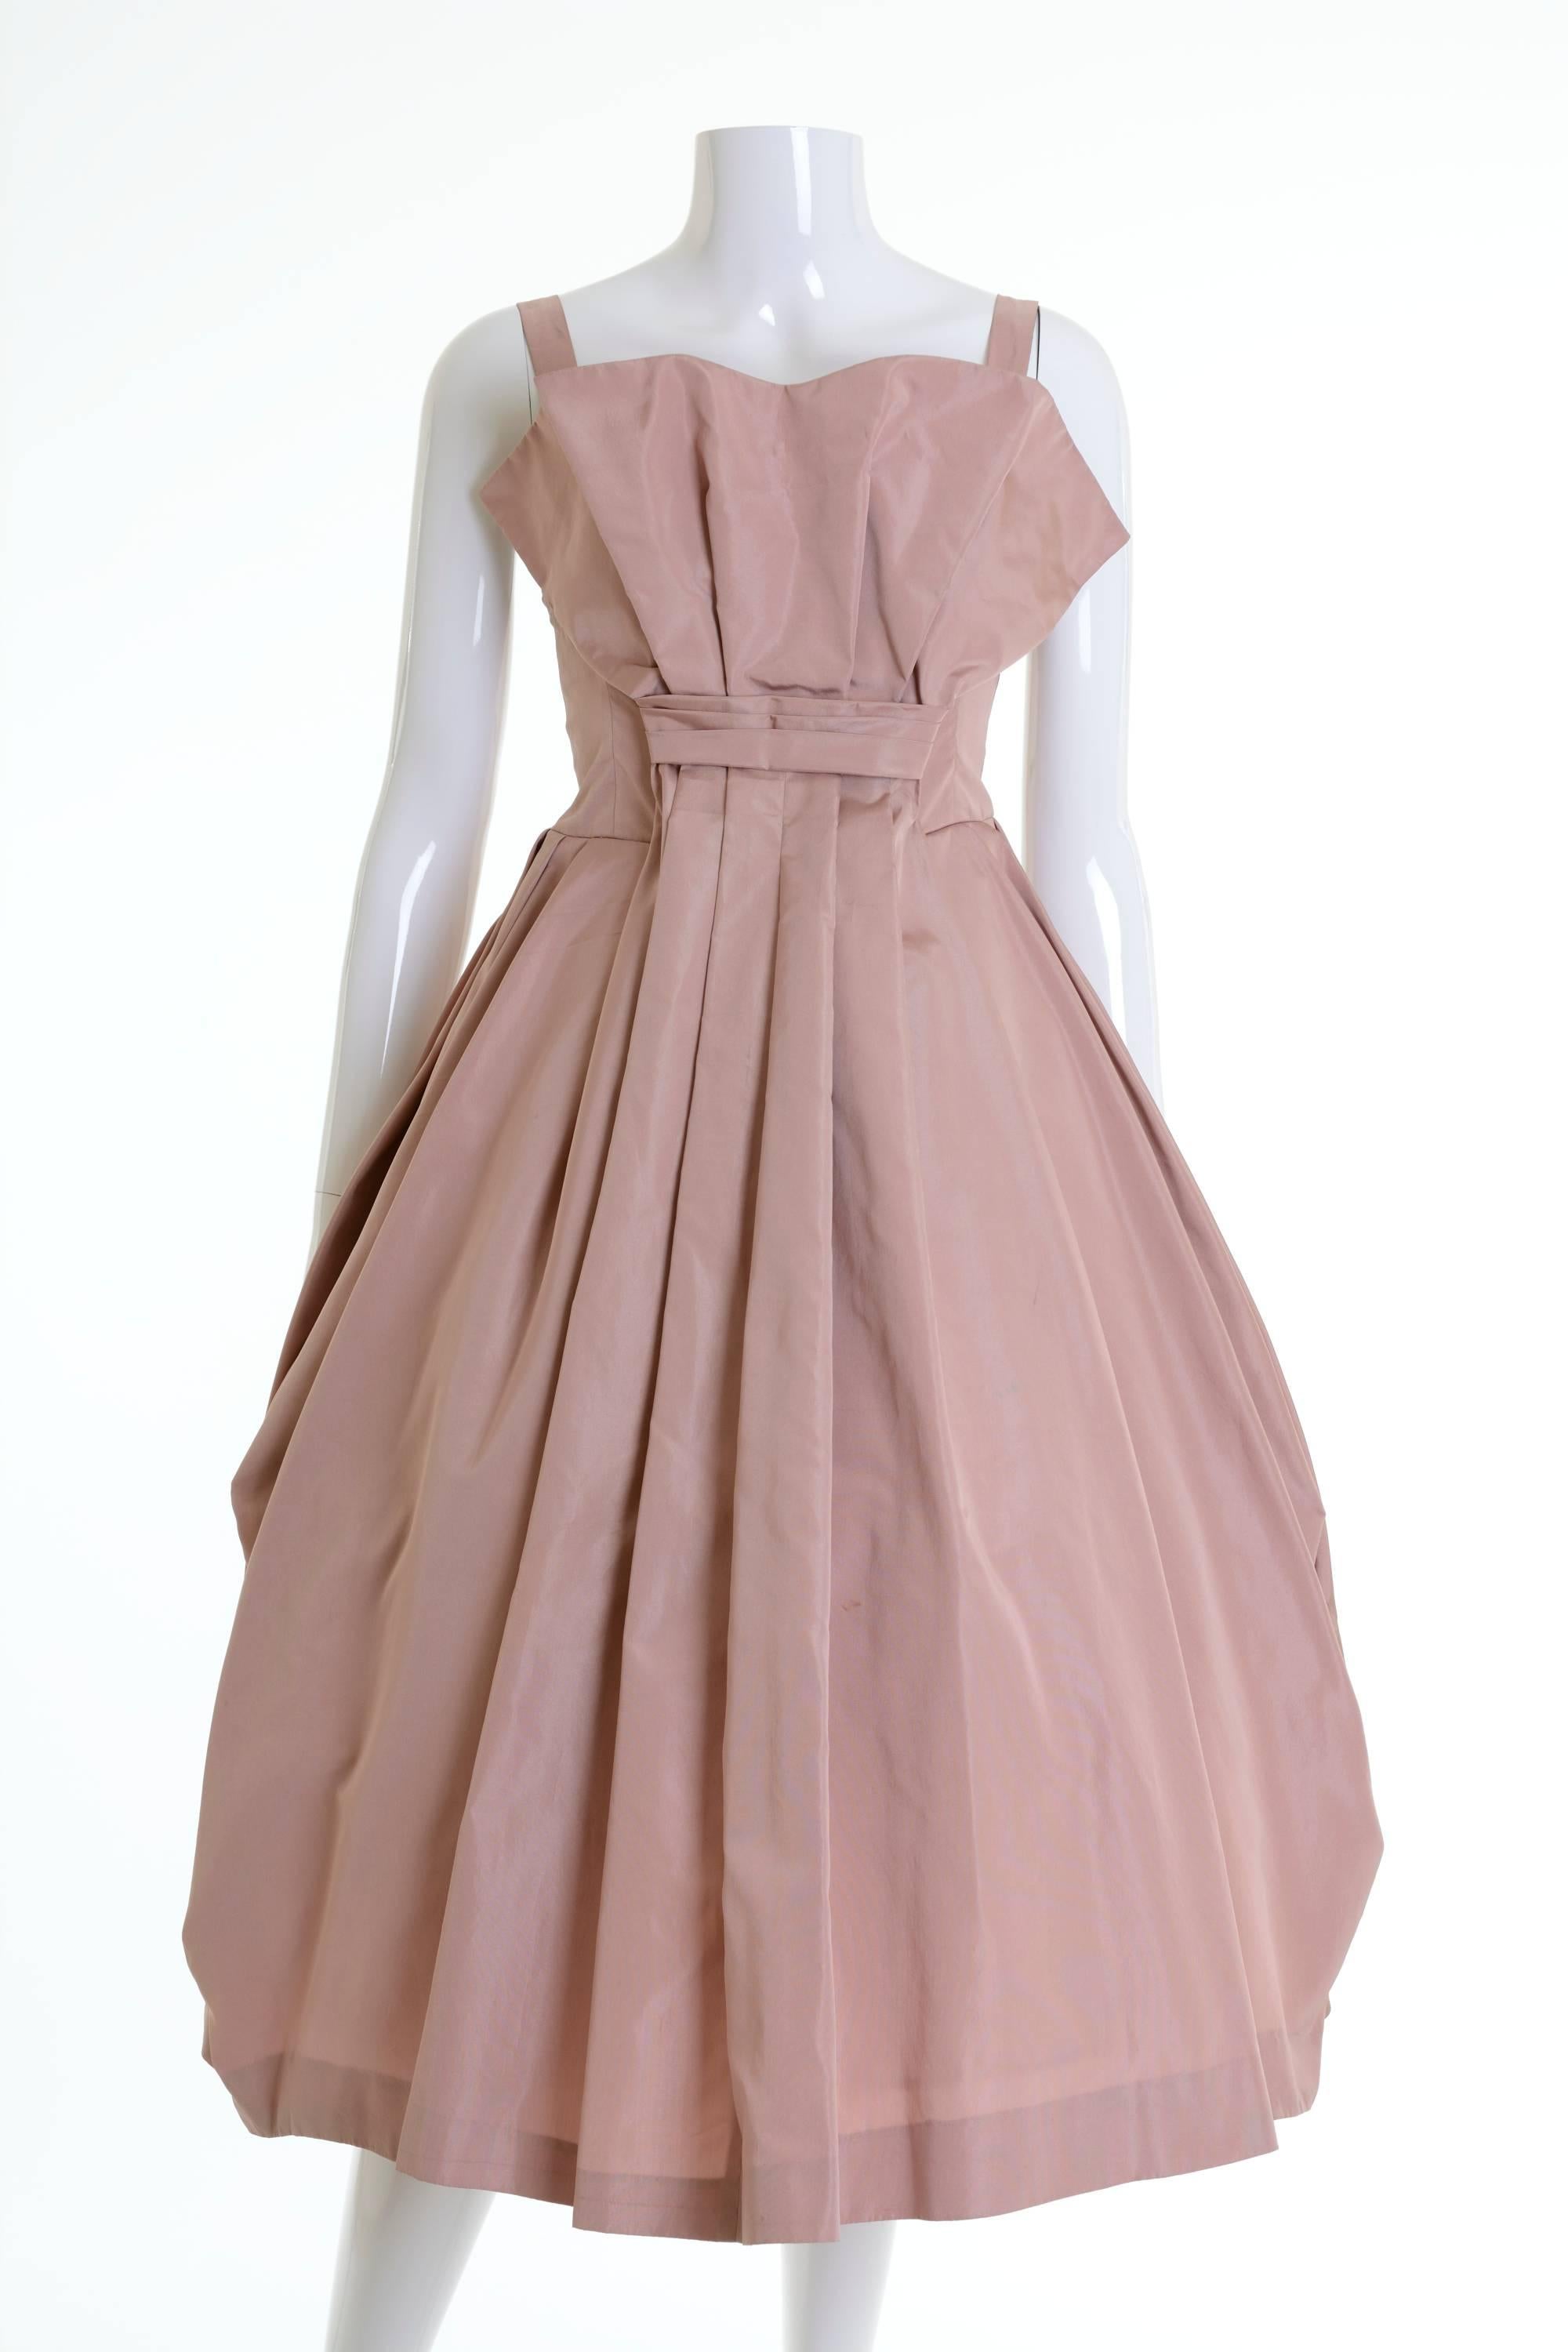 This amazing 1950s cocktail dress is in a powder pink silk taffeta fabric. It has full pleateds circle skirt and back zip closure.
The petticoat is not included.

Very good vintage condition
 
Label: N/A
Fabric: silk taffeta
Color: powder